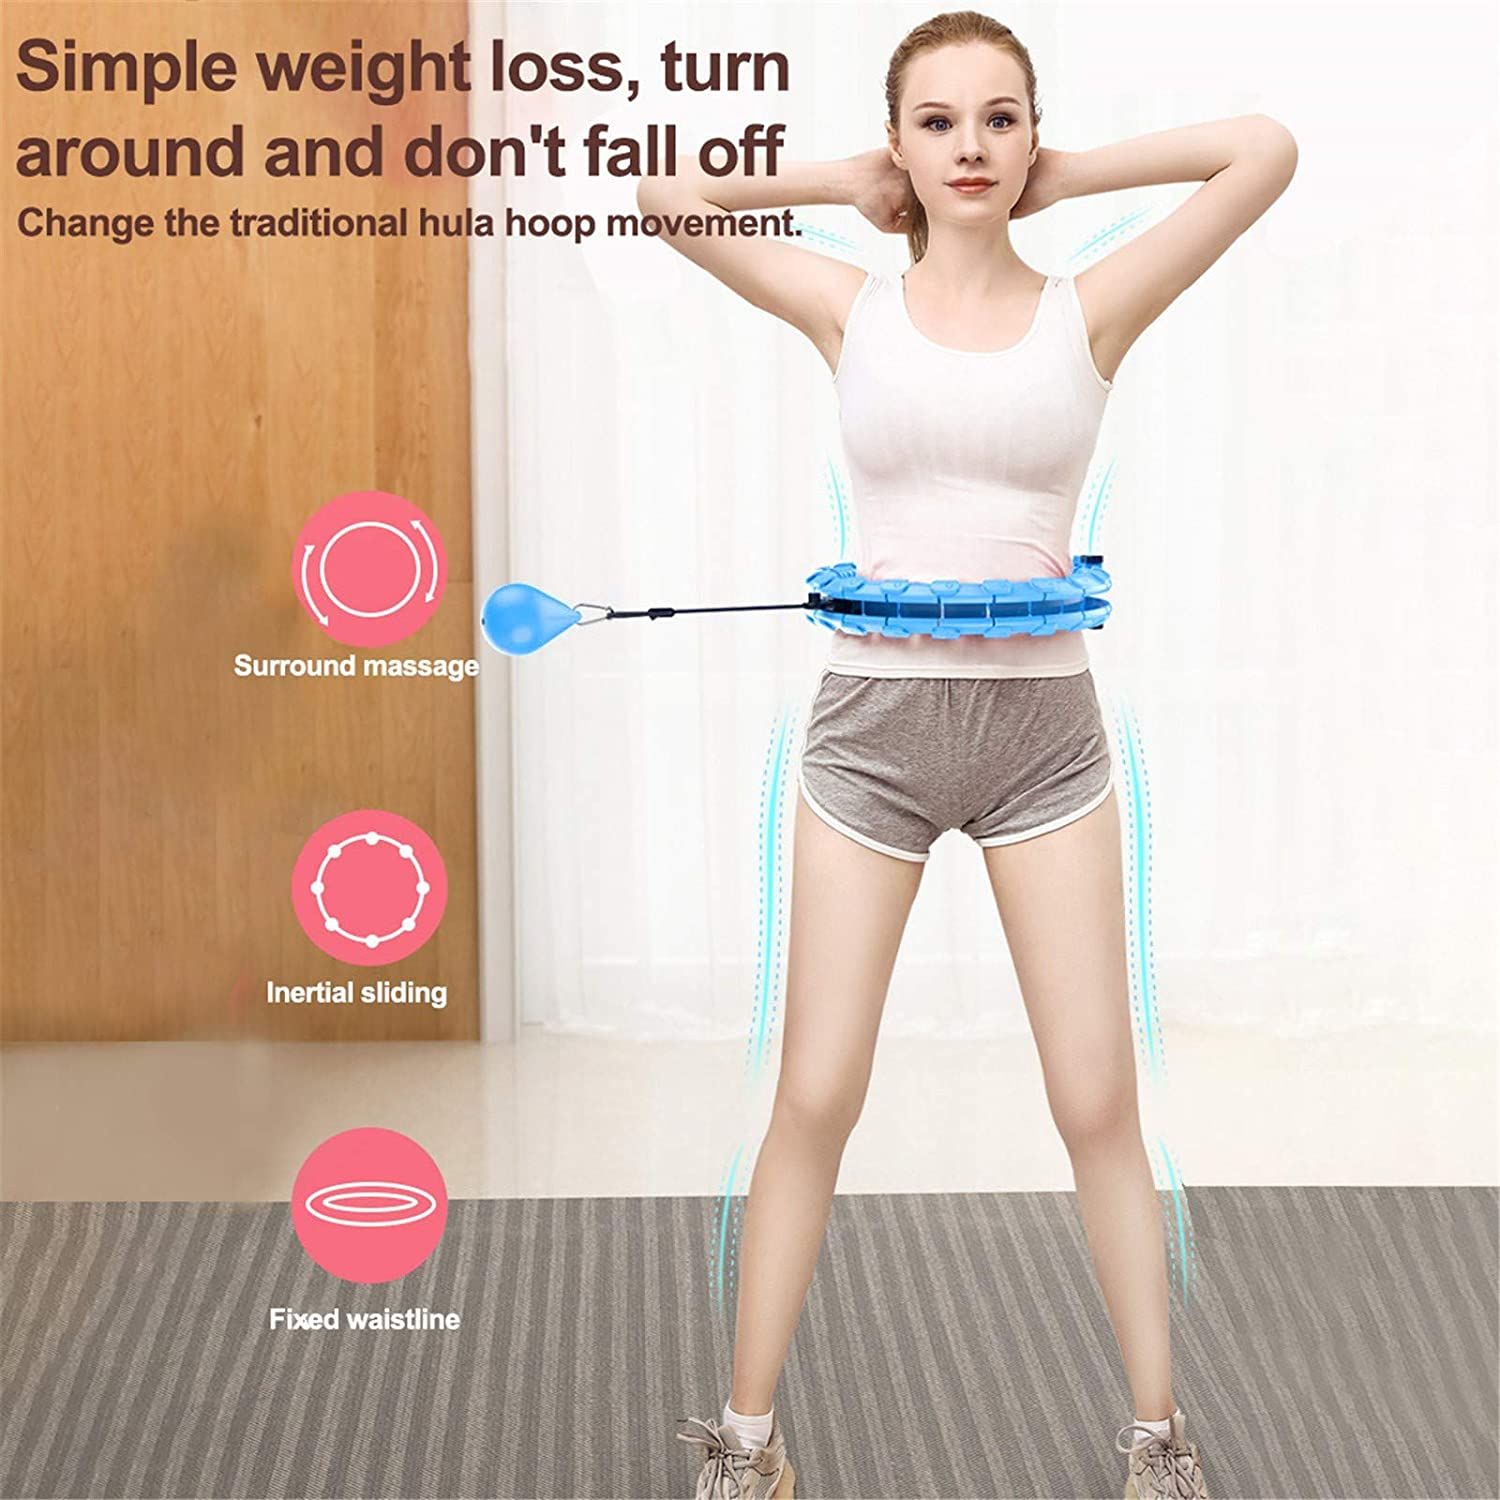 Smart Weighted Hula Hoop 2 in 1 Adjustable Exercise Hoop for Adults with 24 Detachable Knots Waist Trainer with Auto Spinning Ball Workout Resistance Band Fitness Massage Abdomen Exerciser 